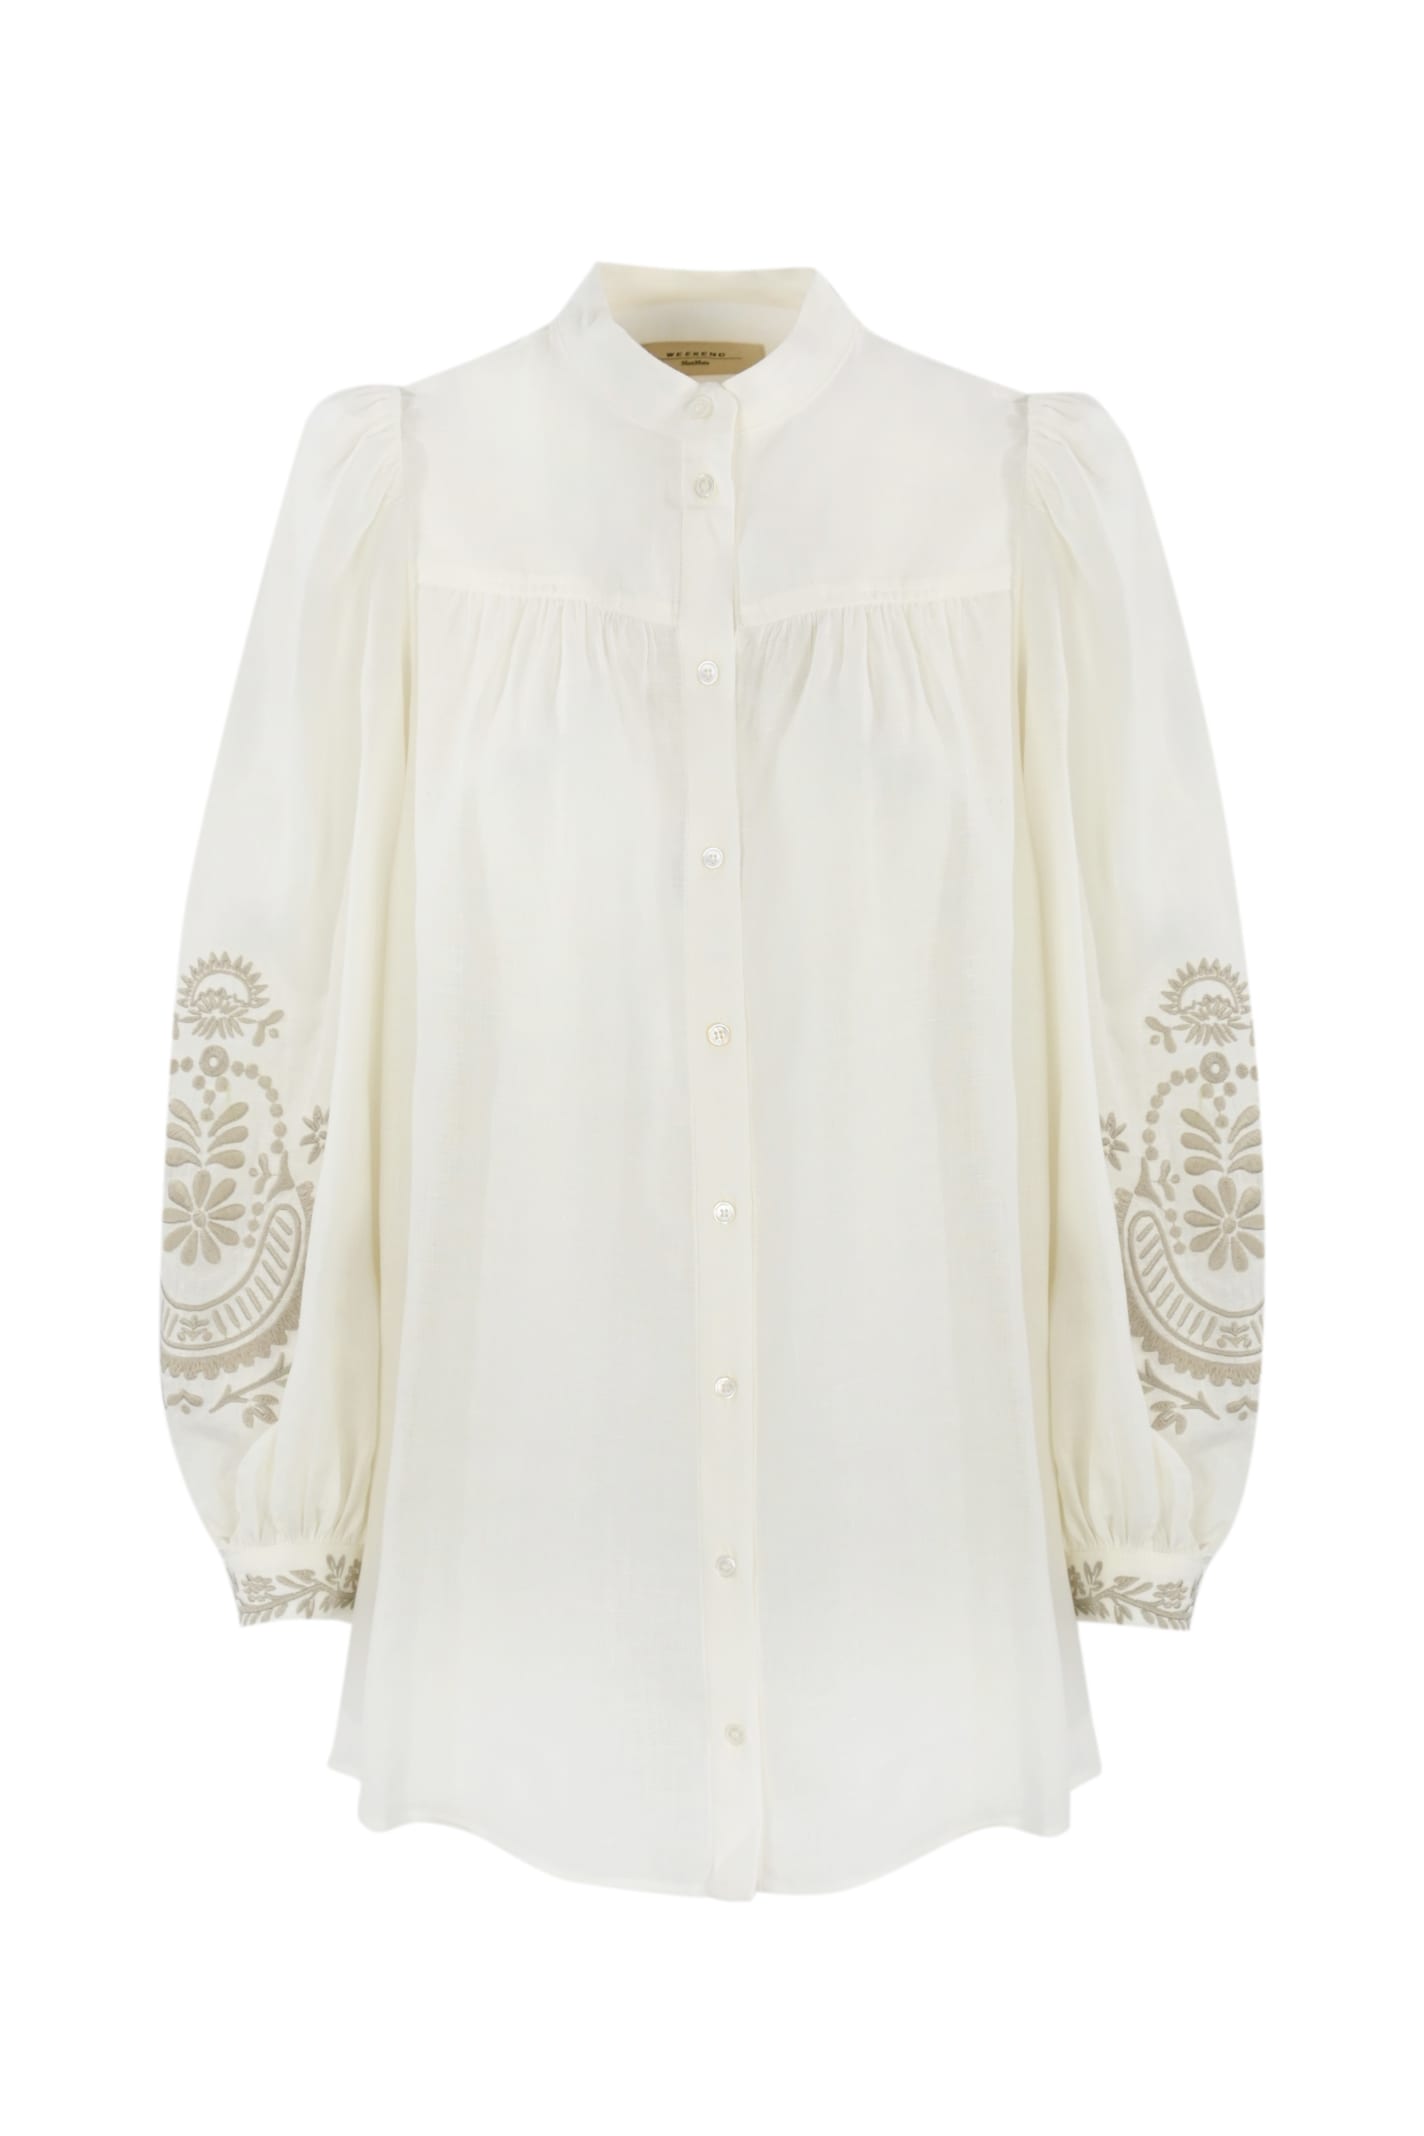 WEEKEND MAX MARA LINEN CANVAS SHIRT WITH CARNIA EMBROIDERY